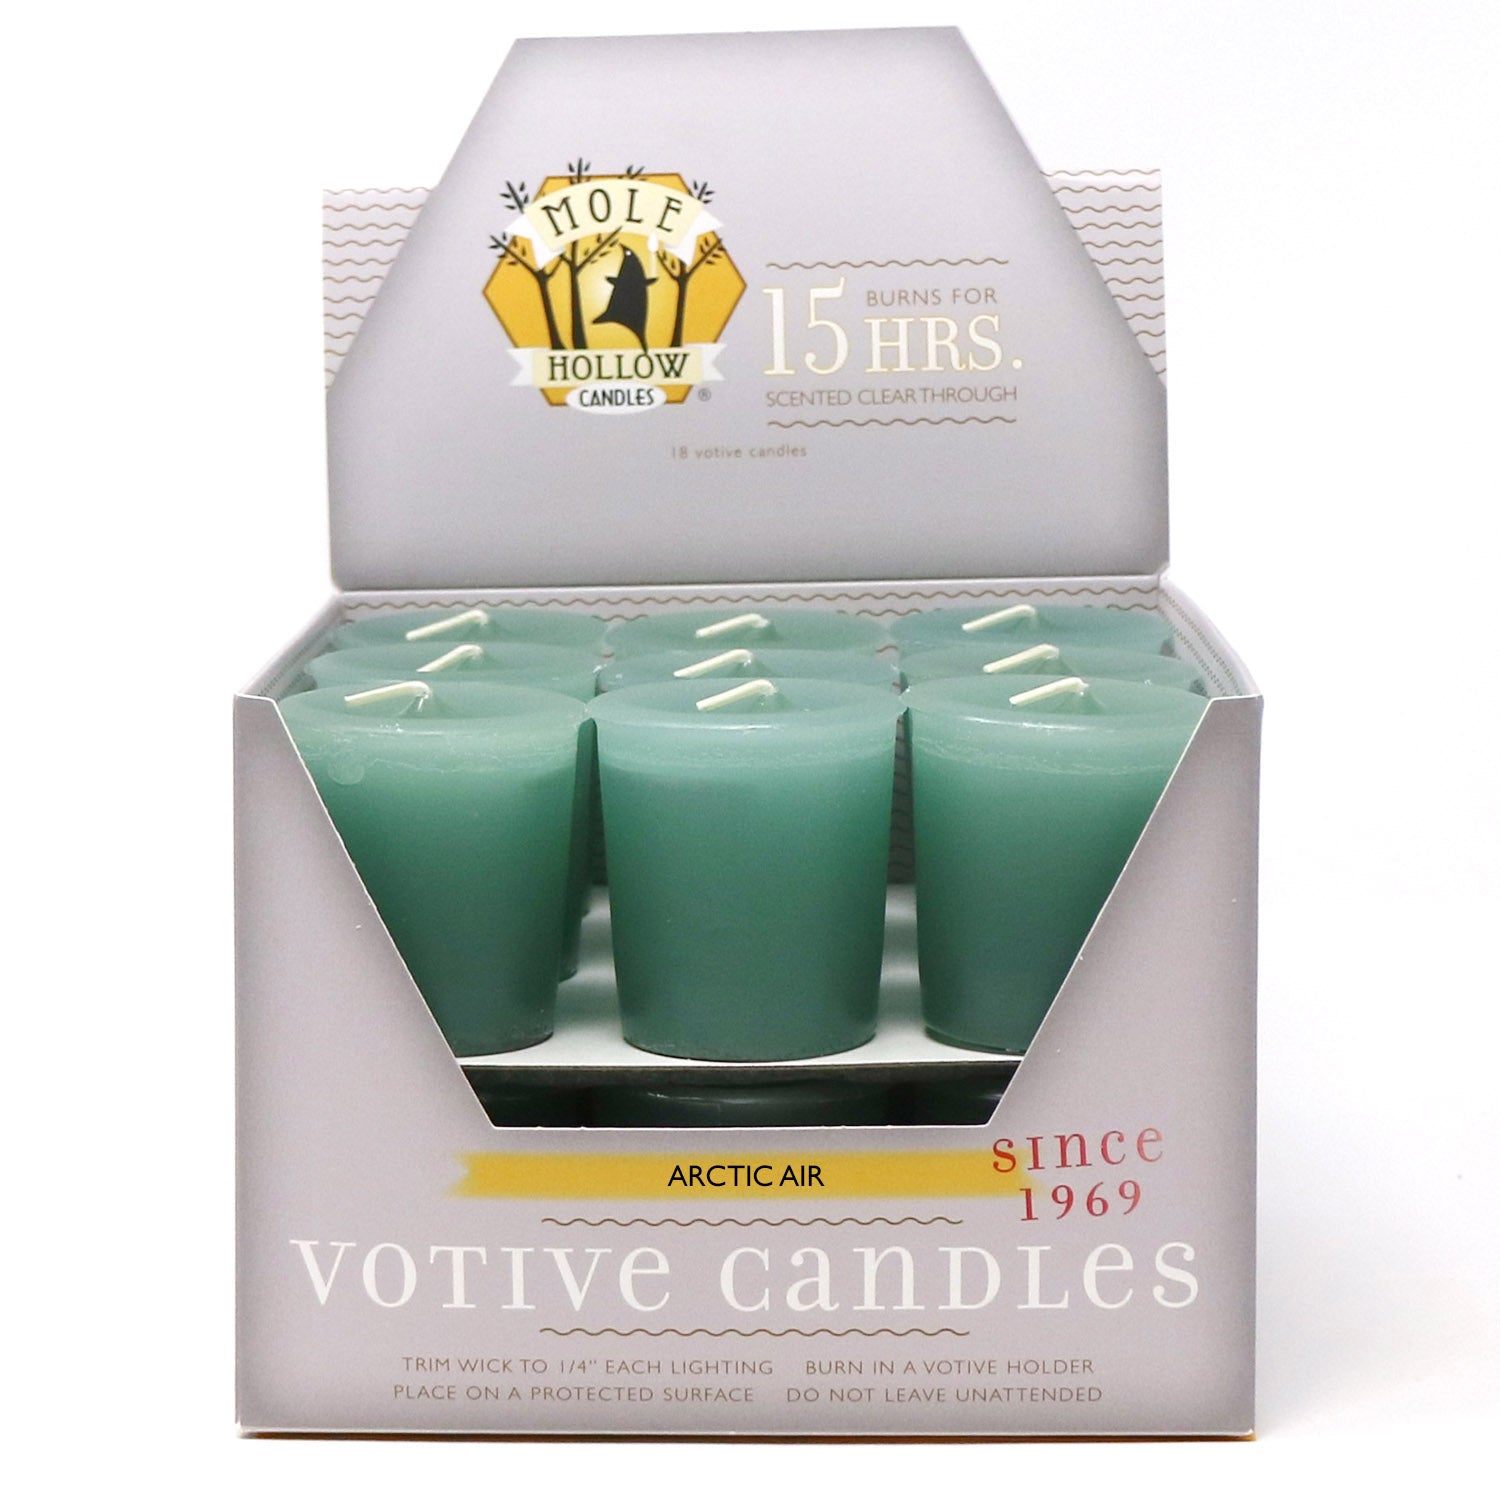 Arctic Air scented votives, box of 18